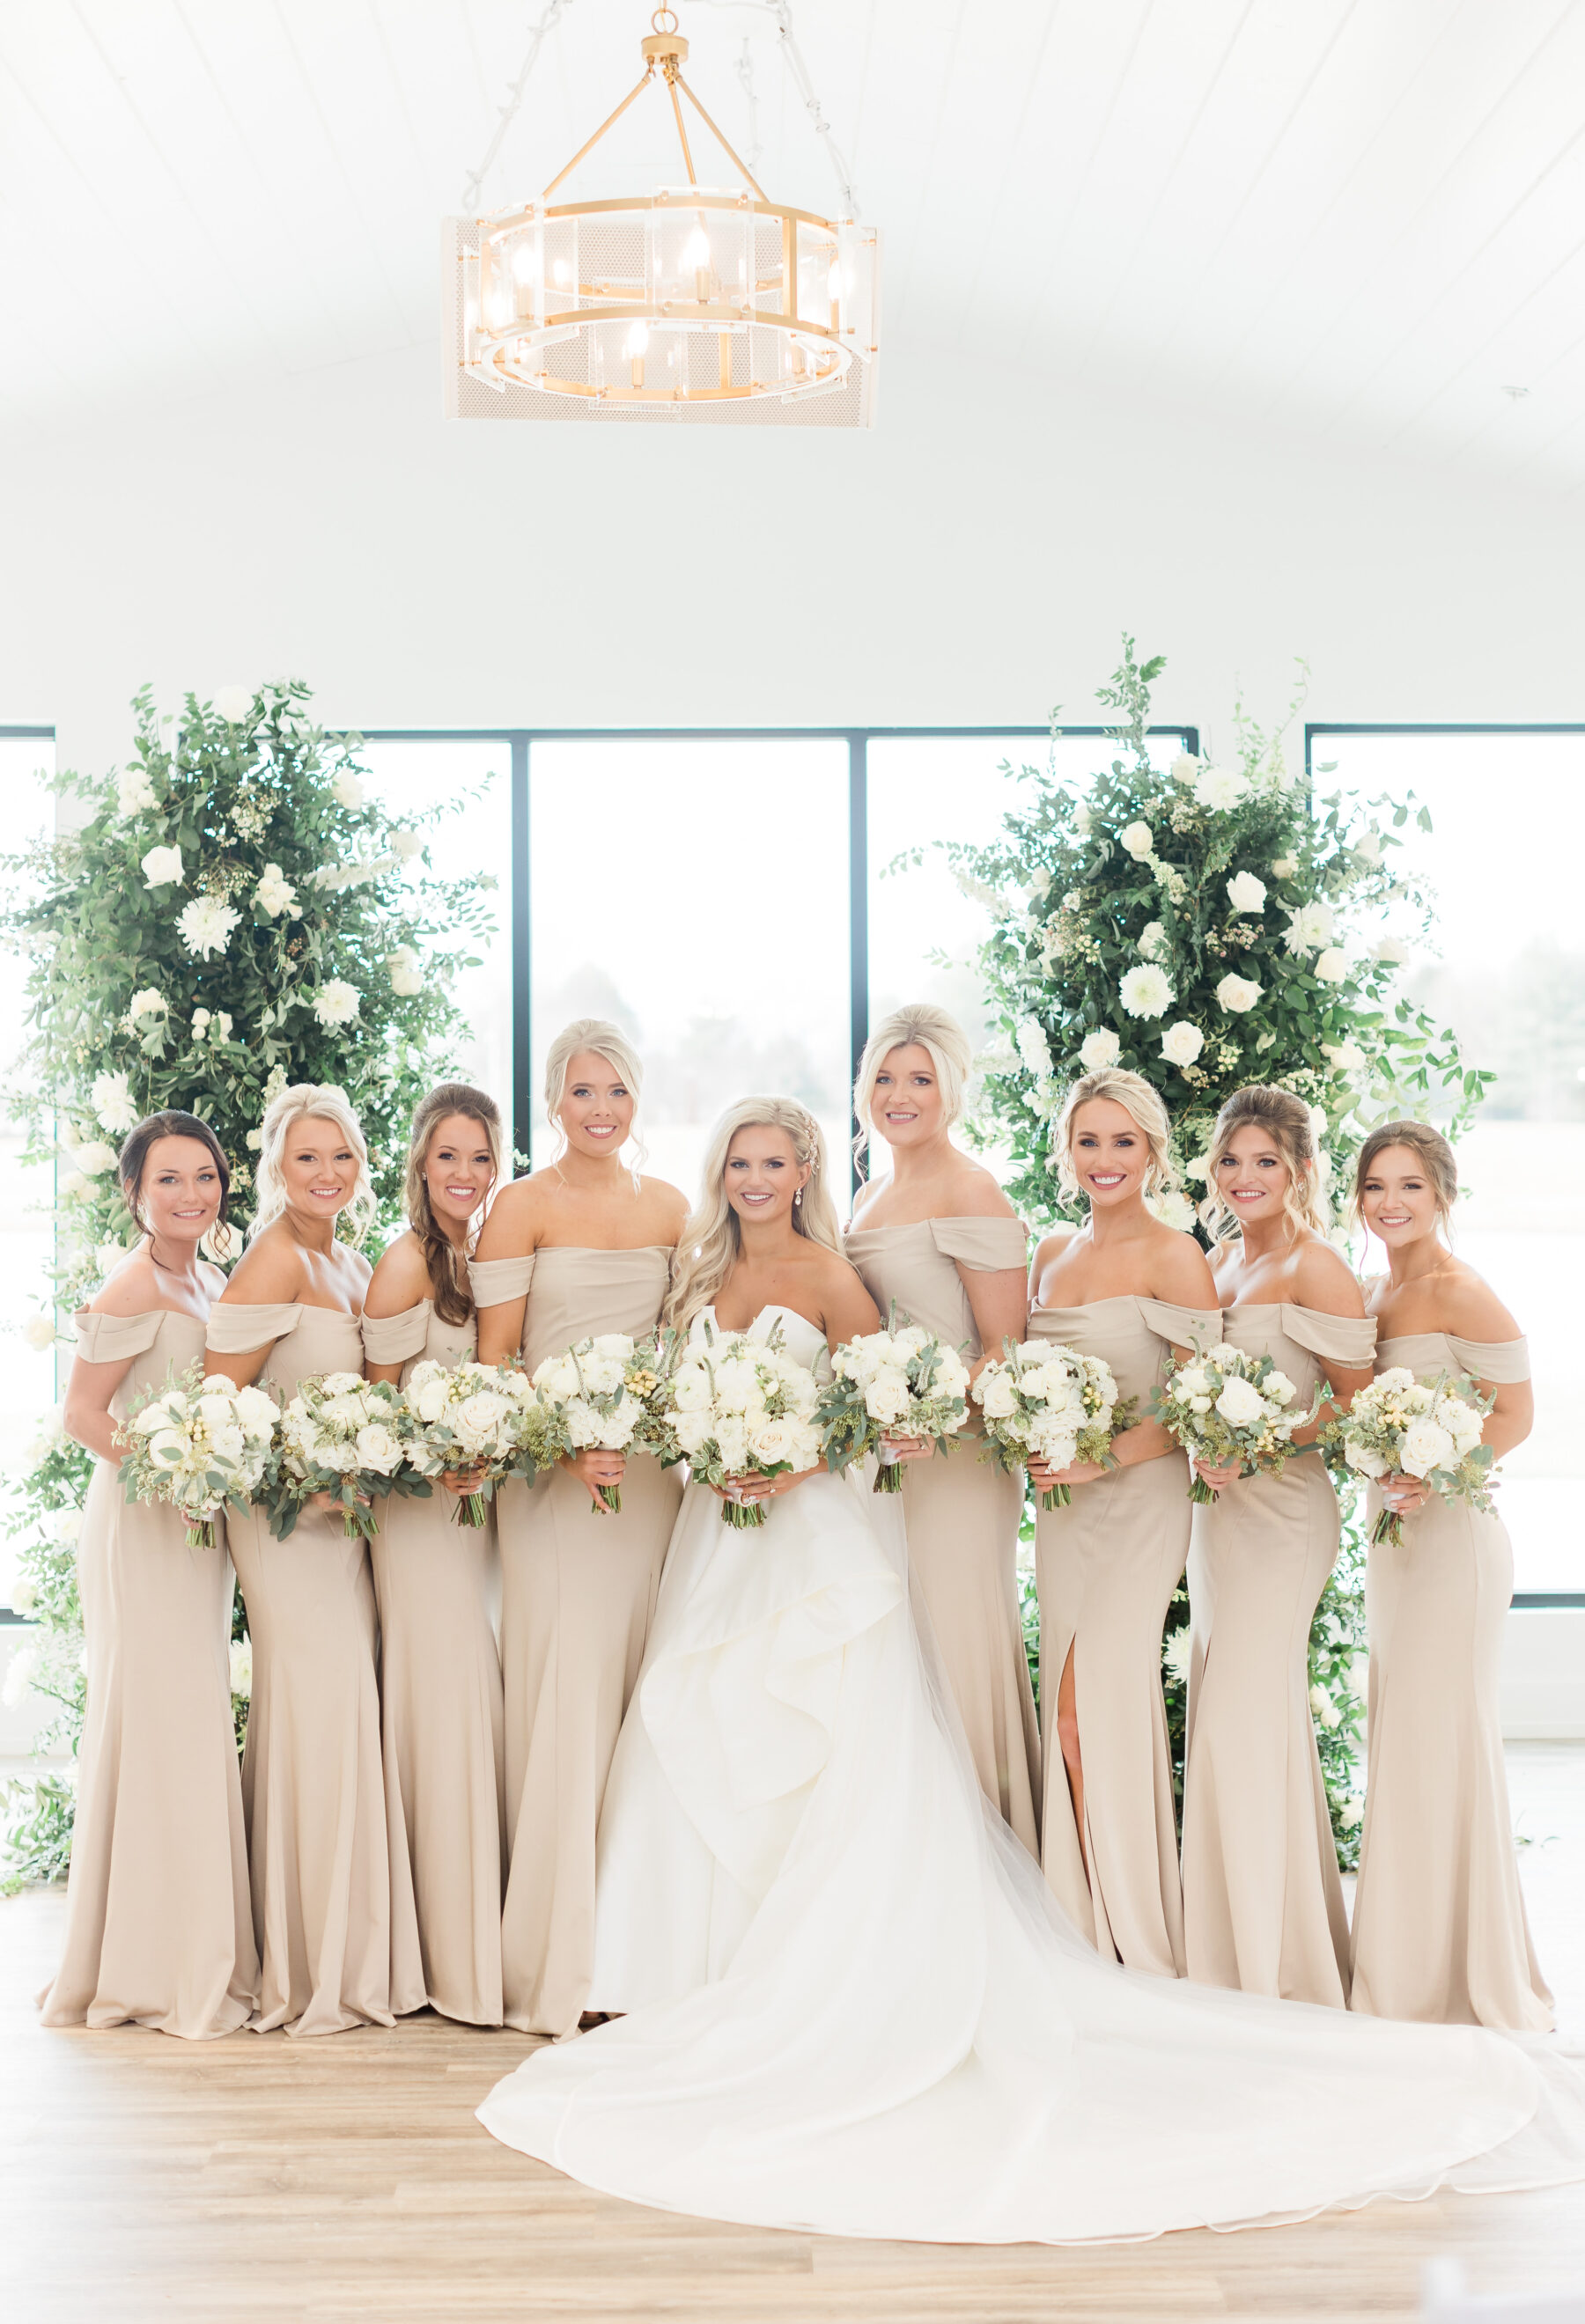 Bridesmaids Dresses from Bella Bridesmaids in Brentwood